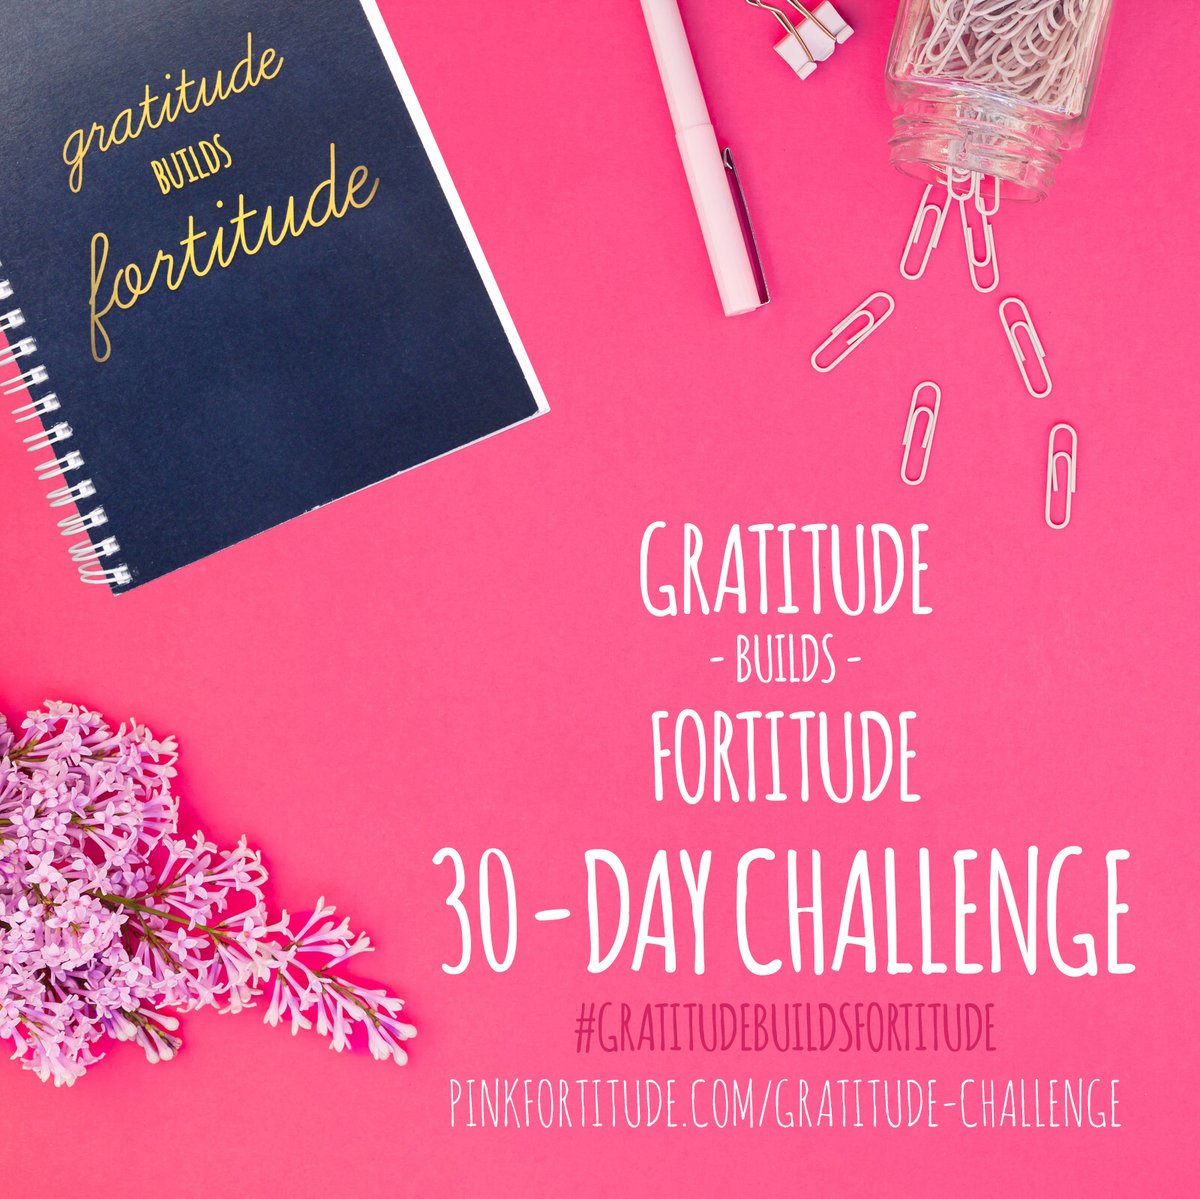 Raise your hand if life seems to have taken over these days. Are you looking to find the calm during the storm? Join me for the Gratitude Builds Fortitude 30-Day Challenge. PS - it's FREE! --> pinkfortitude.com/gratitude-chal… #gratitudebuildsfortitude #pinkfortitude #gratitude